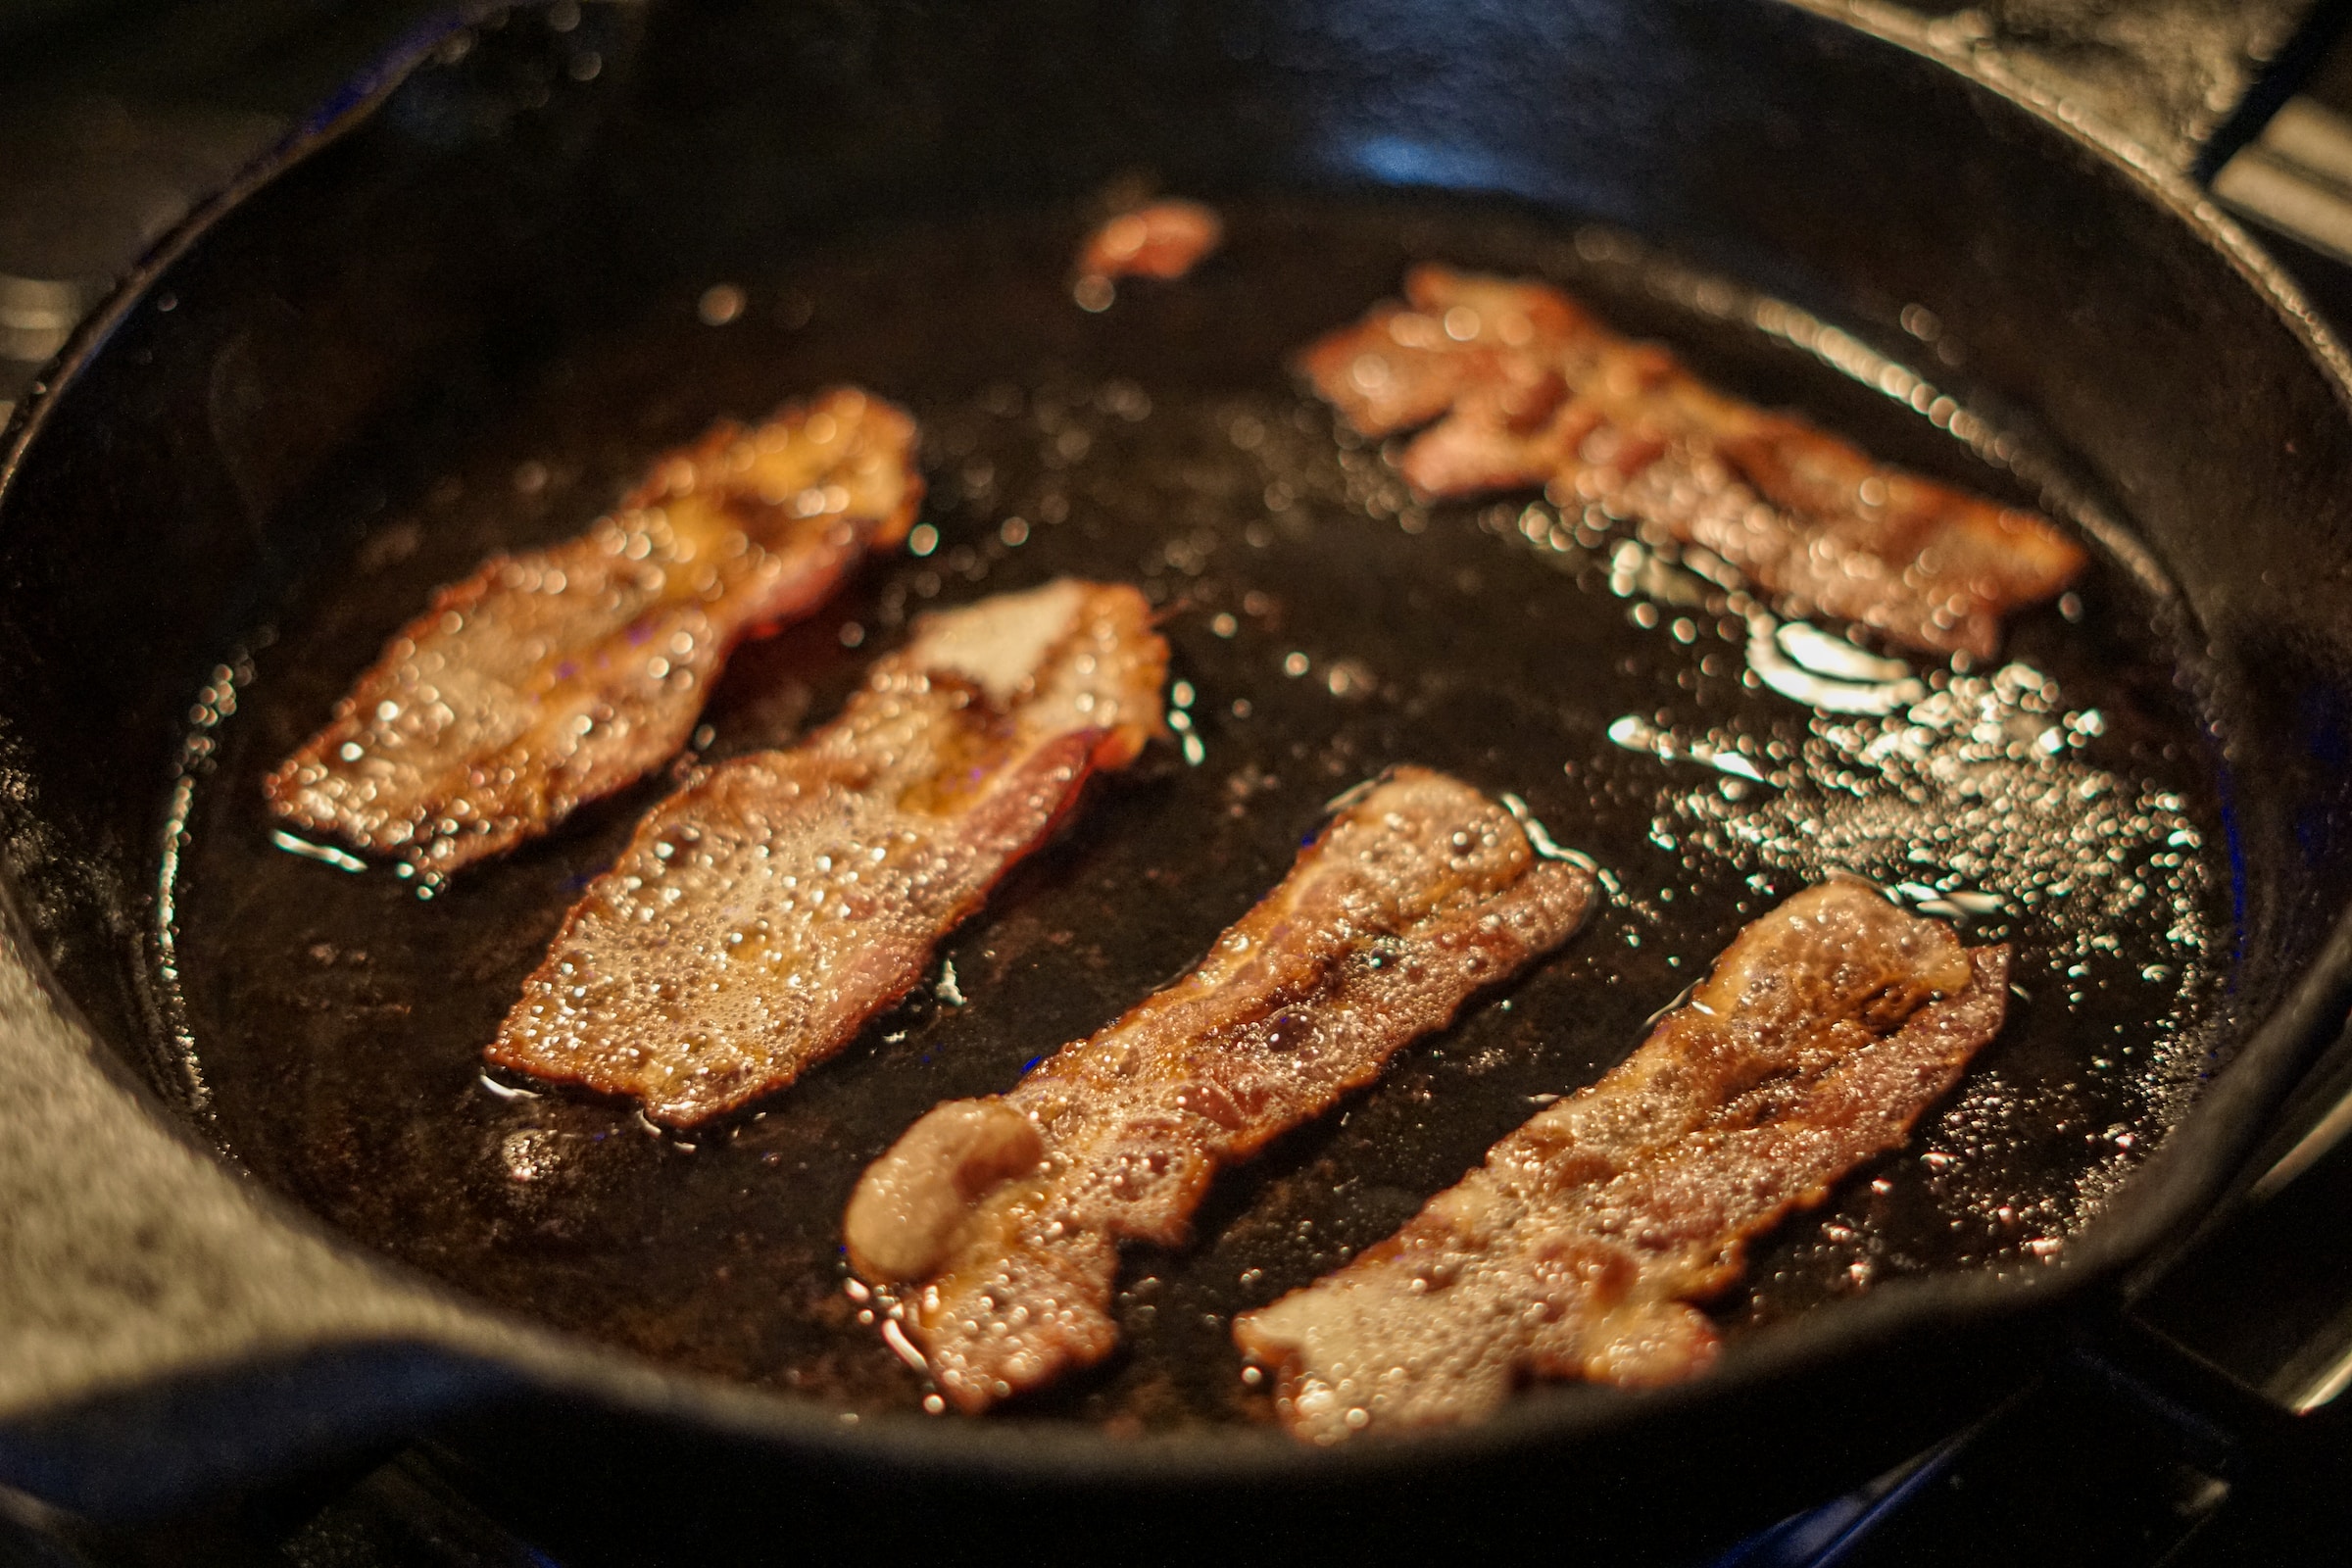 Save that bacon grease and add flavor to your cooking